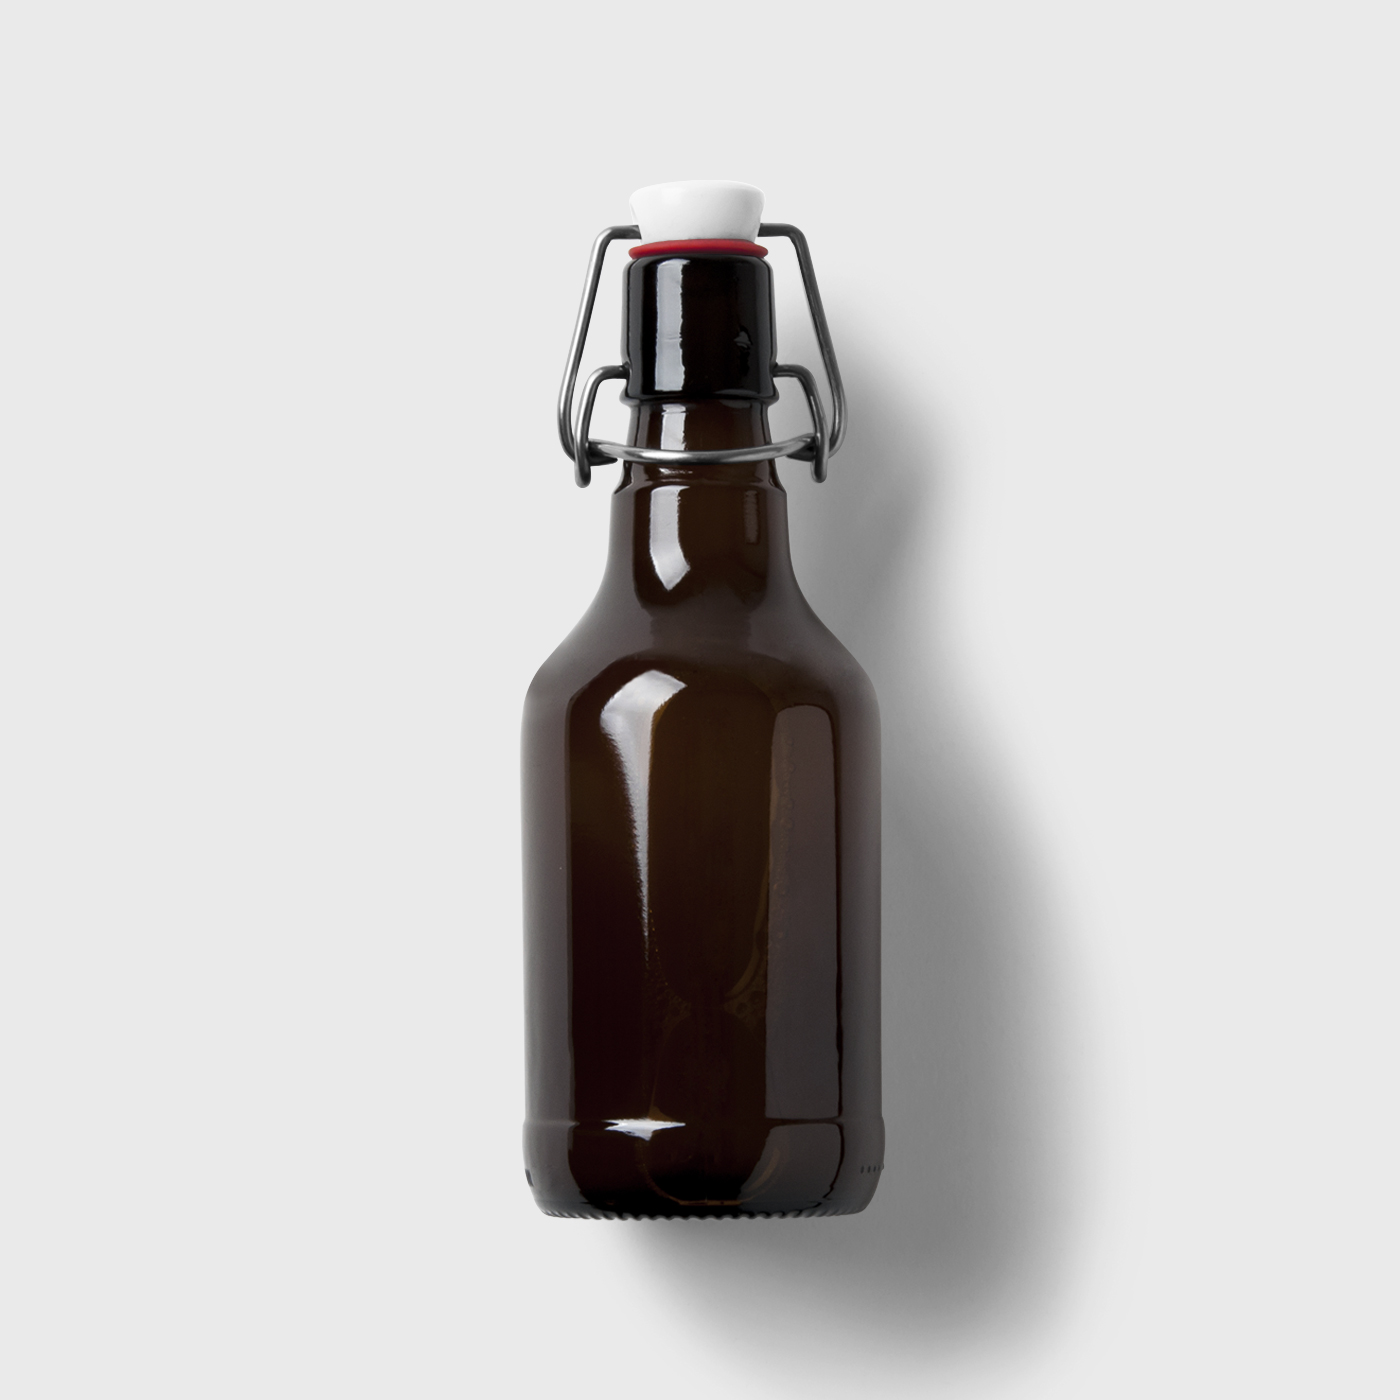 Top View of a Beer Bottle Mockup FREE PSD